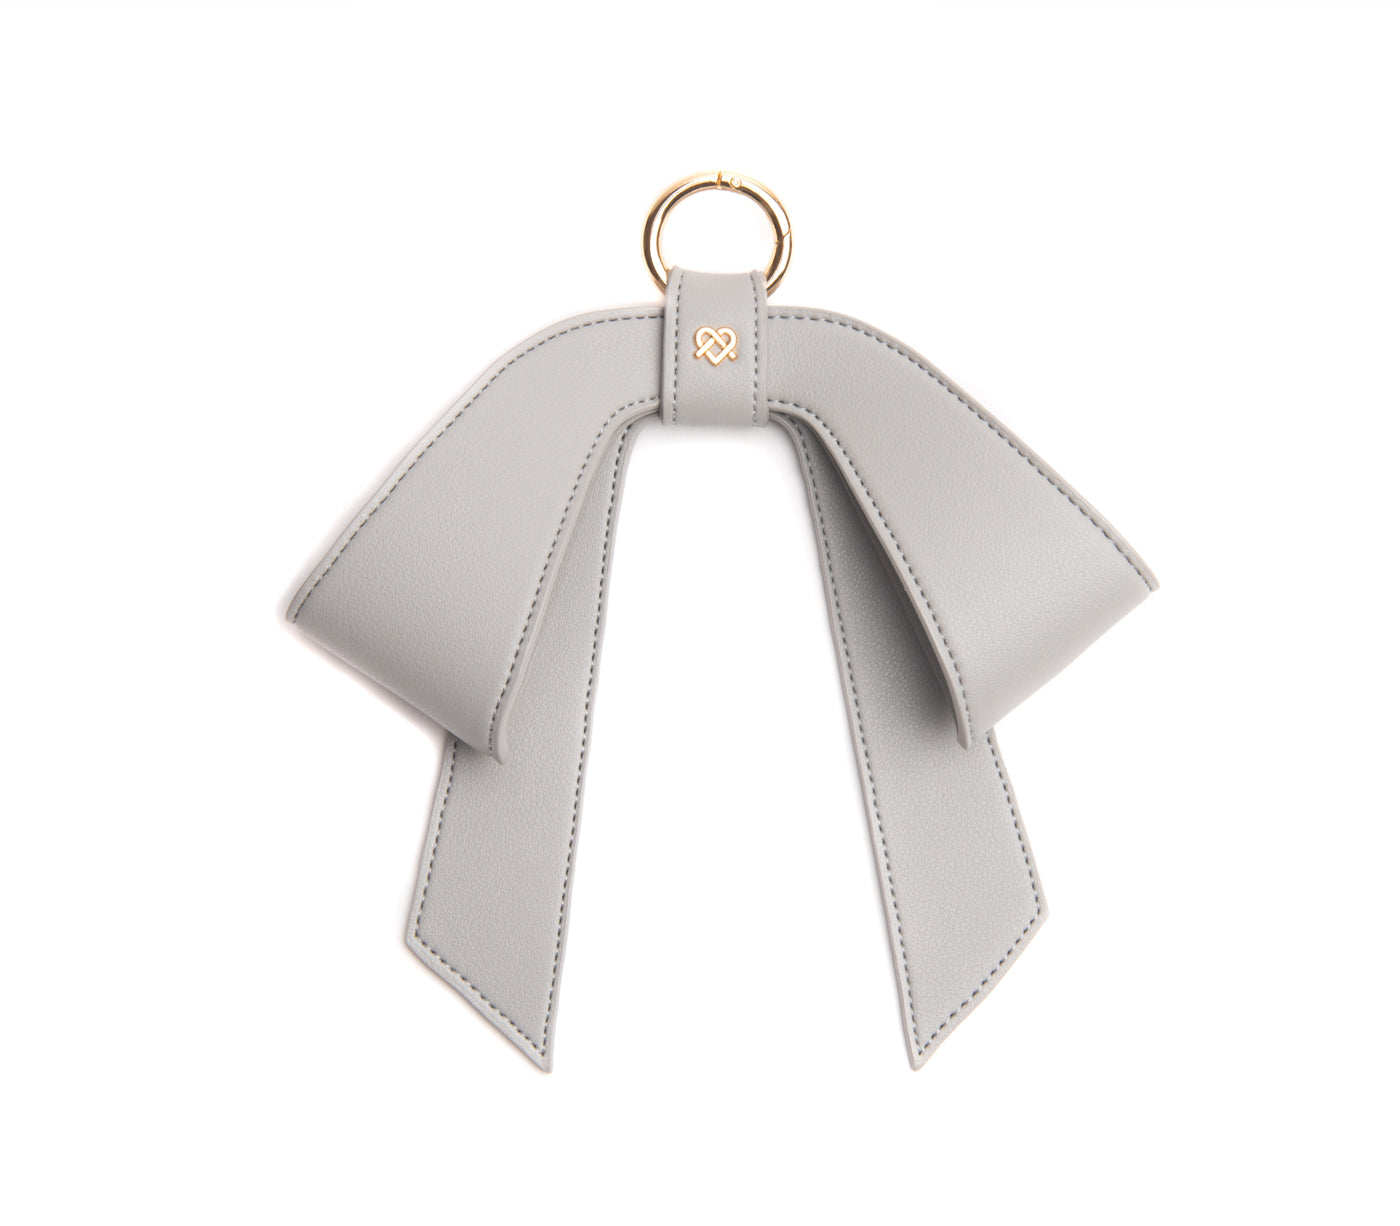 Cottontail Bow - Light Grey Leather Bag Charm